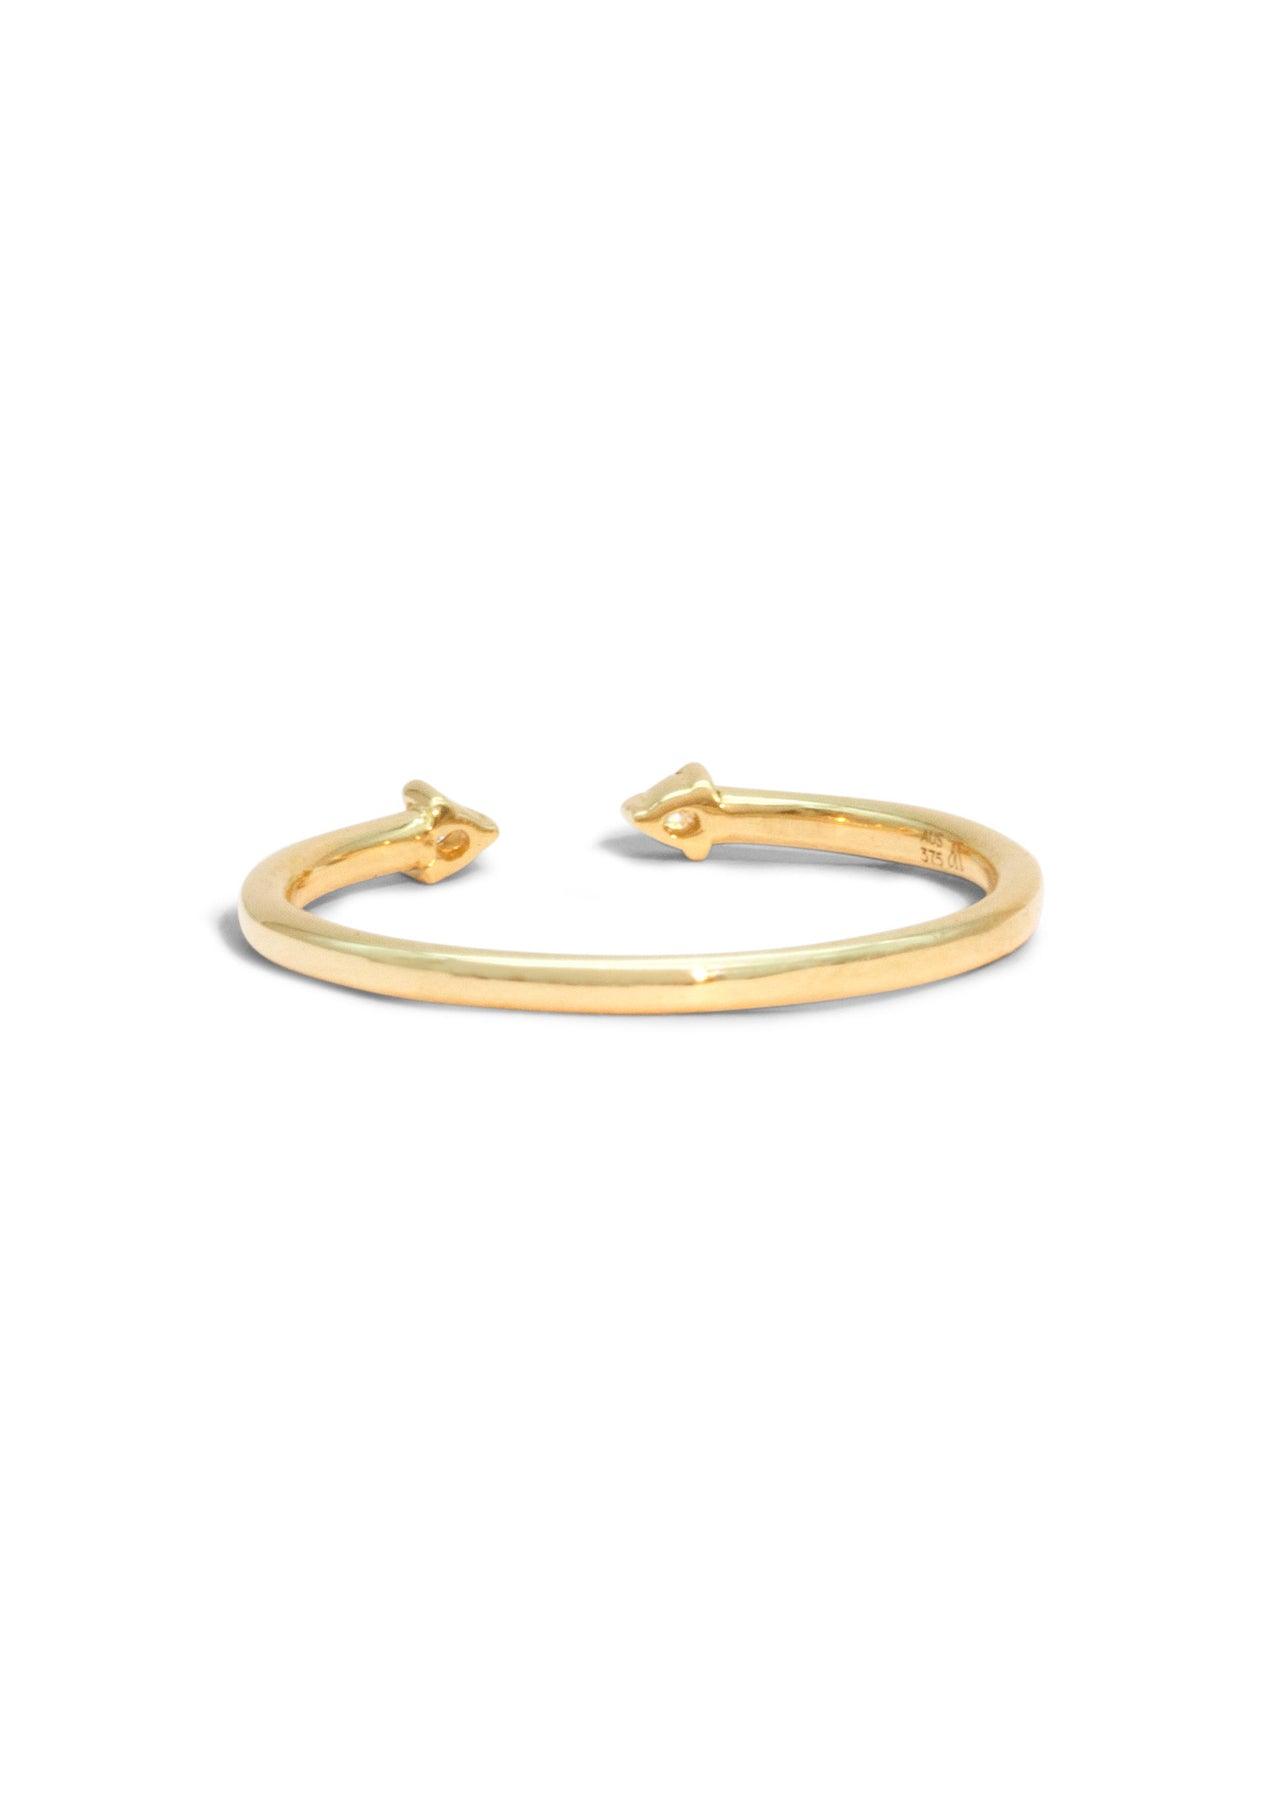 The Solid Gold Diamond Duo Ring